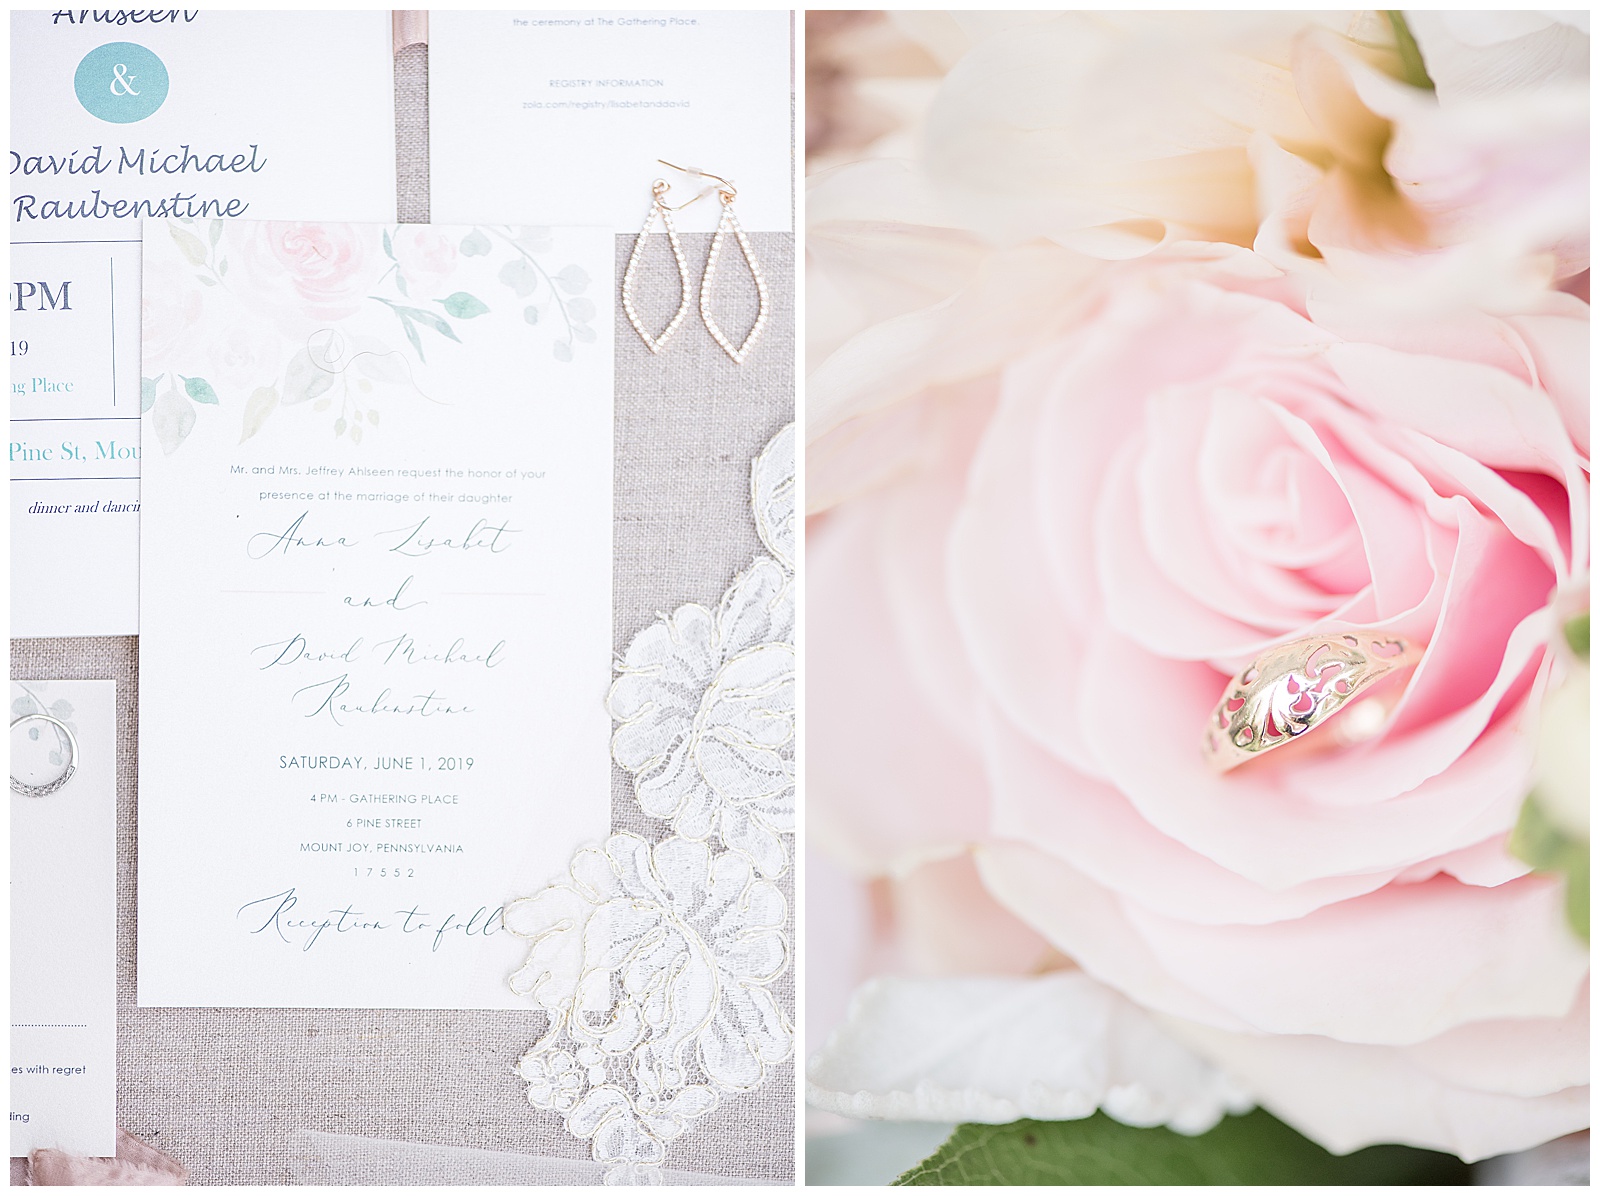 A bride's grandma's ring in a flower and the wedding invitations